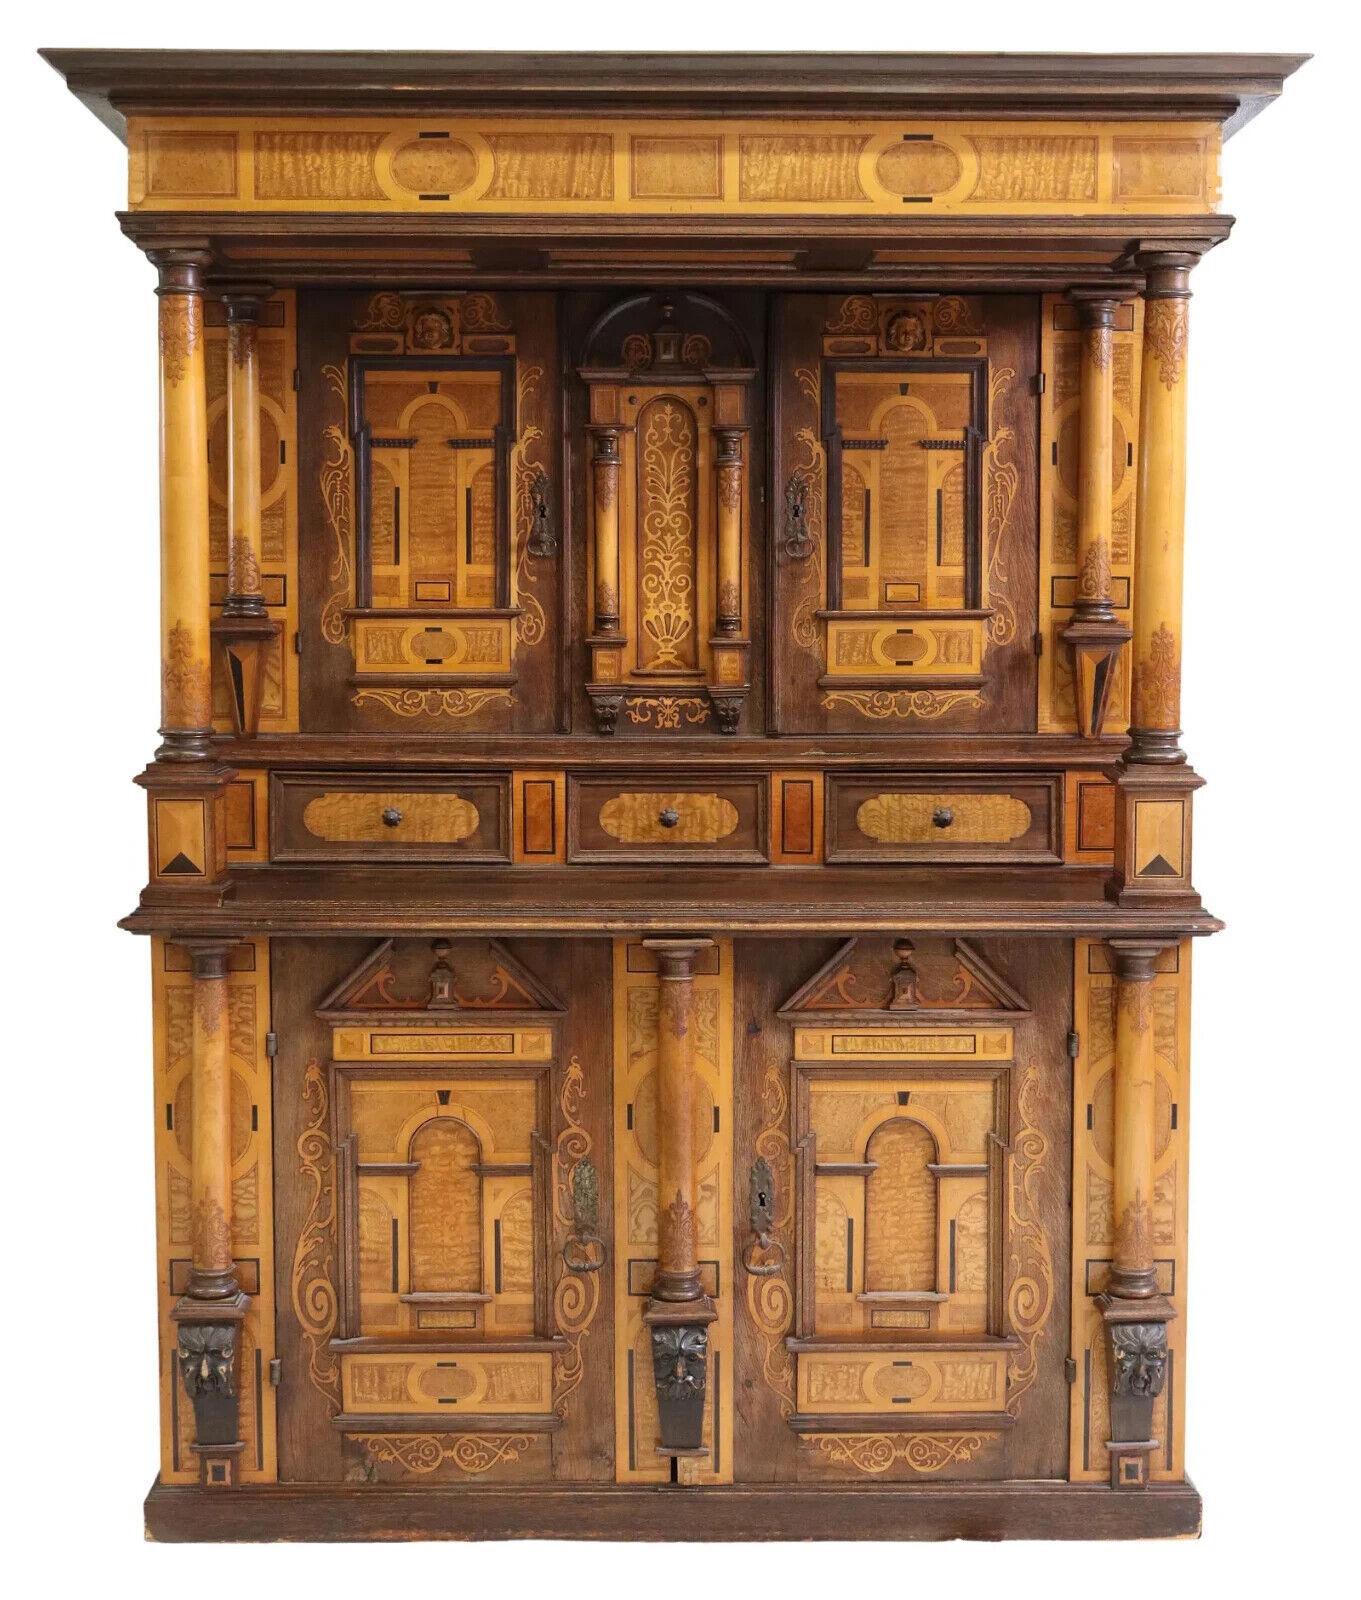 Handsome 1800s Antique Renaissance Revival, Inlaid Carved Oak, with Shelves, Cupboard!!

Antique Cupboard, Renaissance Revival, Inlaid Carved Oak, With Shelves and Drawers, 1800s, 19th century!! 
Continental Renaissance Revival inlaid carved oak